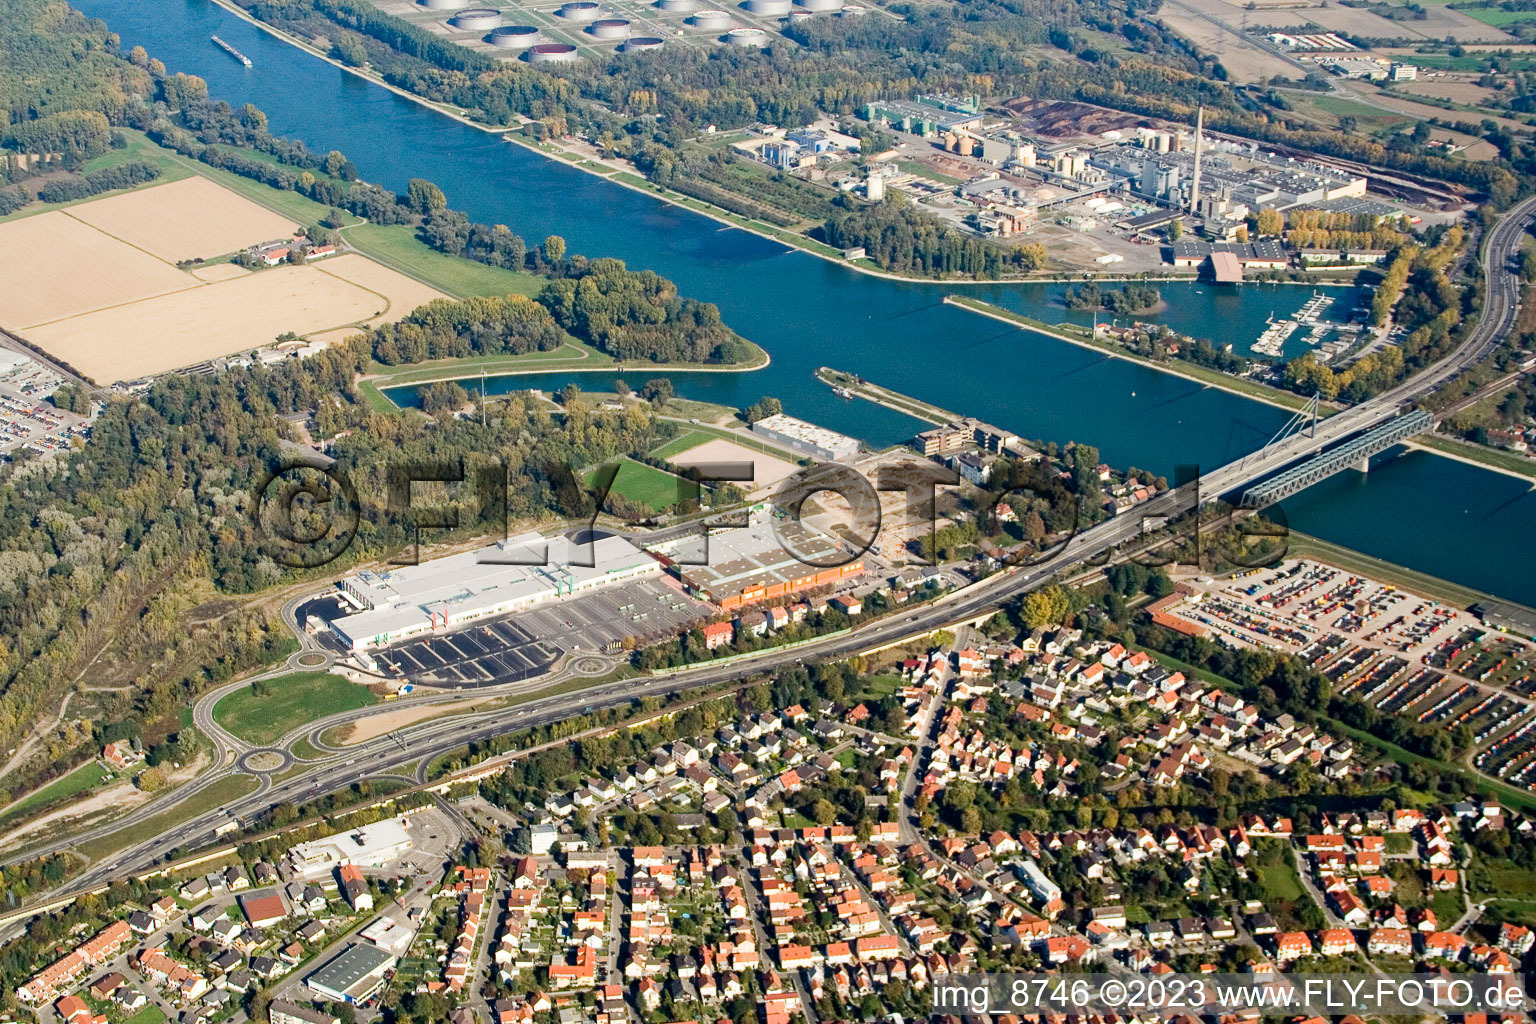 Aerial photograpy of Maximiliancenter retail park in Wörth-Maximiliansau in the district Maximiliansau in Wörth am Rhein in the state Rhineland-Palatinate, Germany